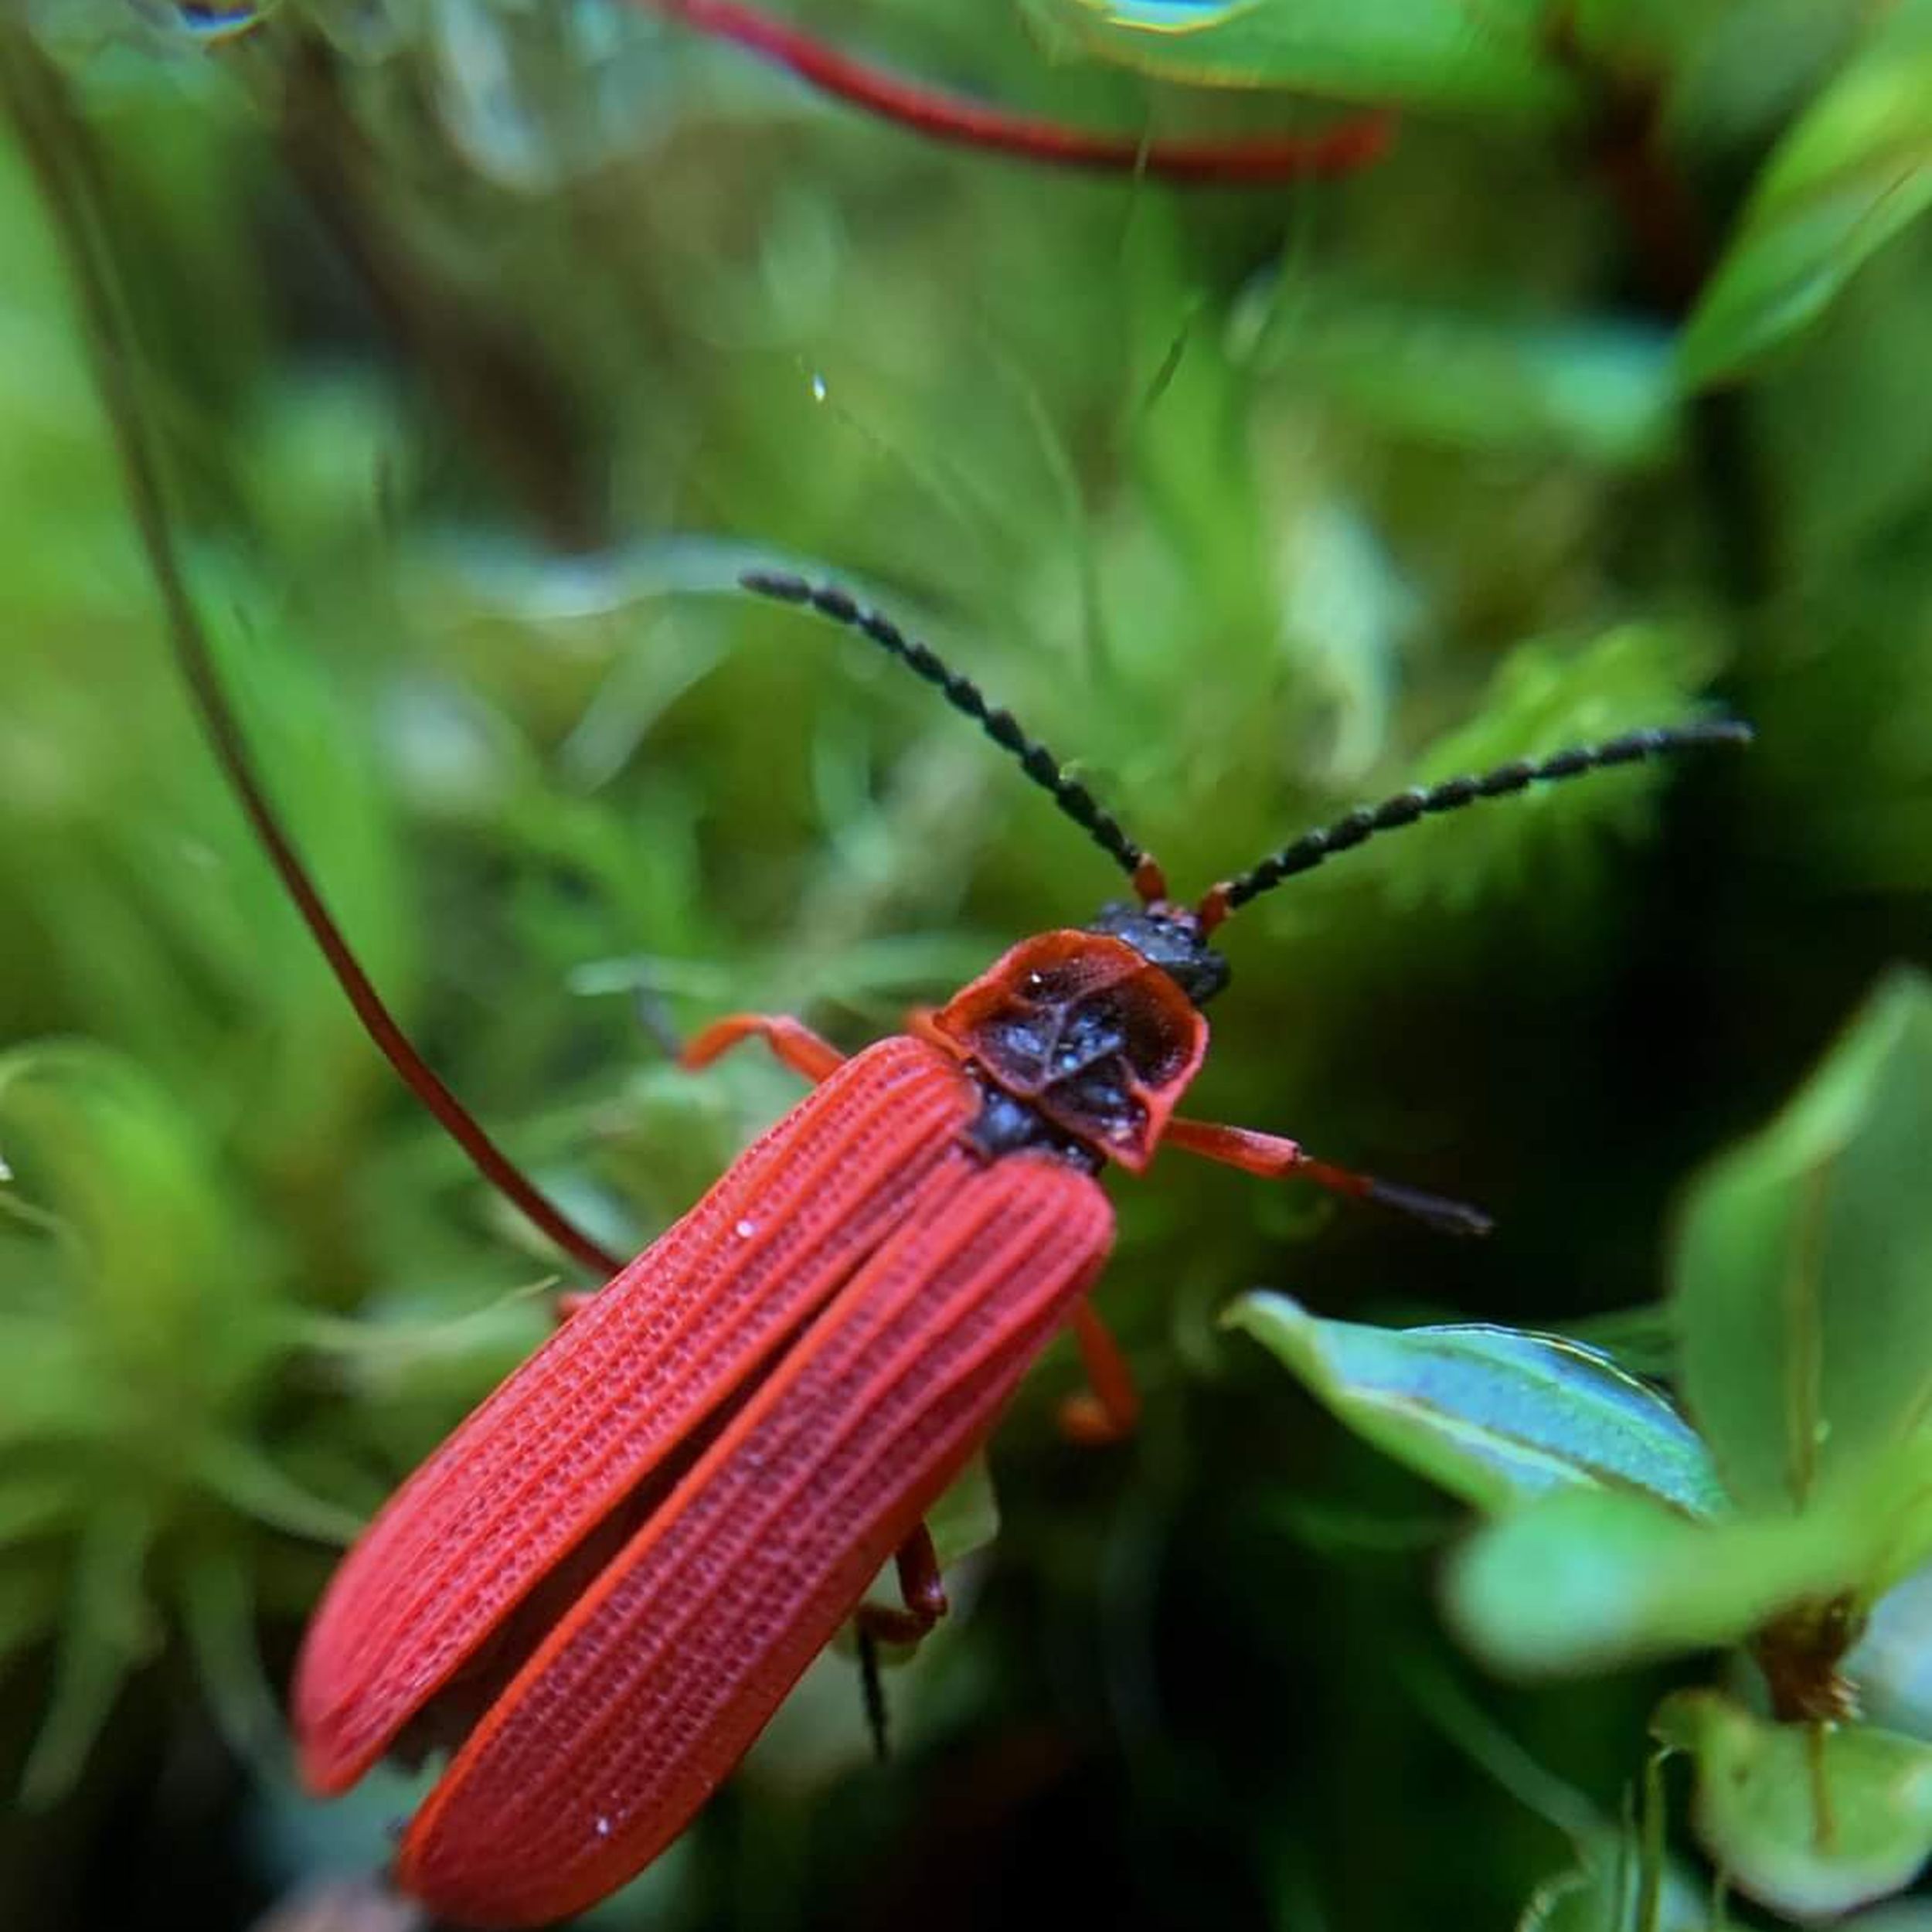 Bugging the Northwest: The bright side of this beetle is its